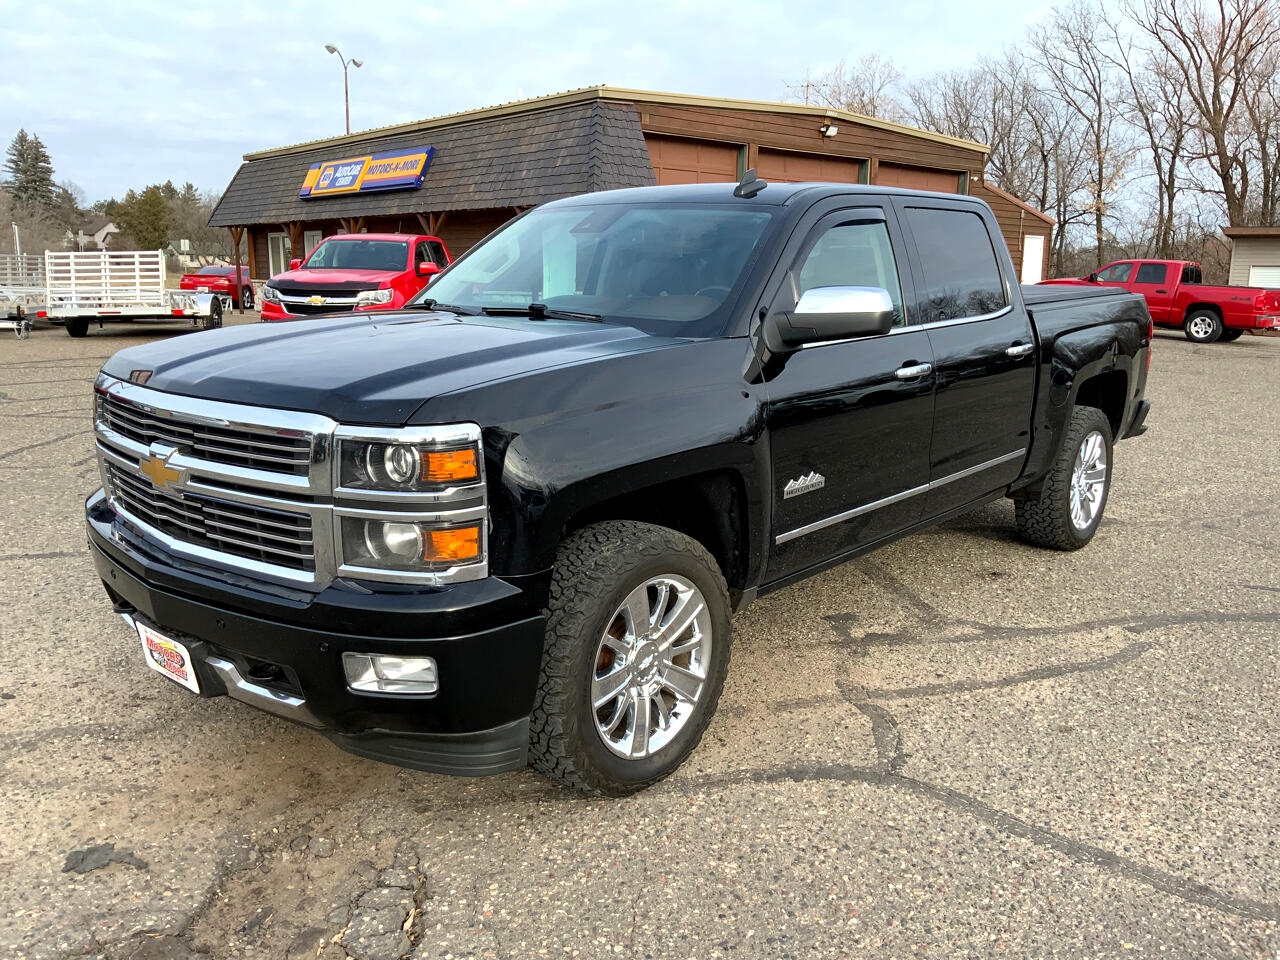 Used 2015 Chevrolet Silverado 1500 High Country with VIN 3GCUKTECXFG378122 for sale in Brainerd, Minnesota